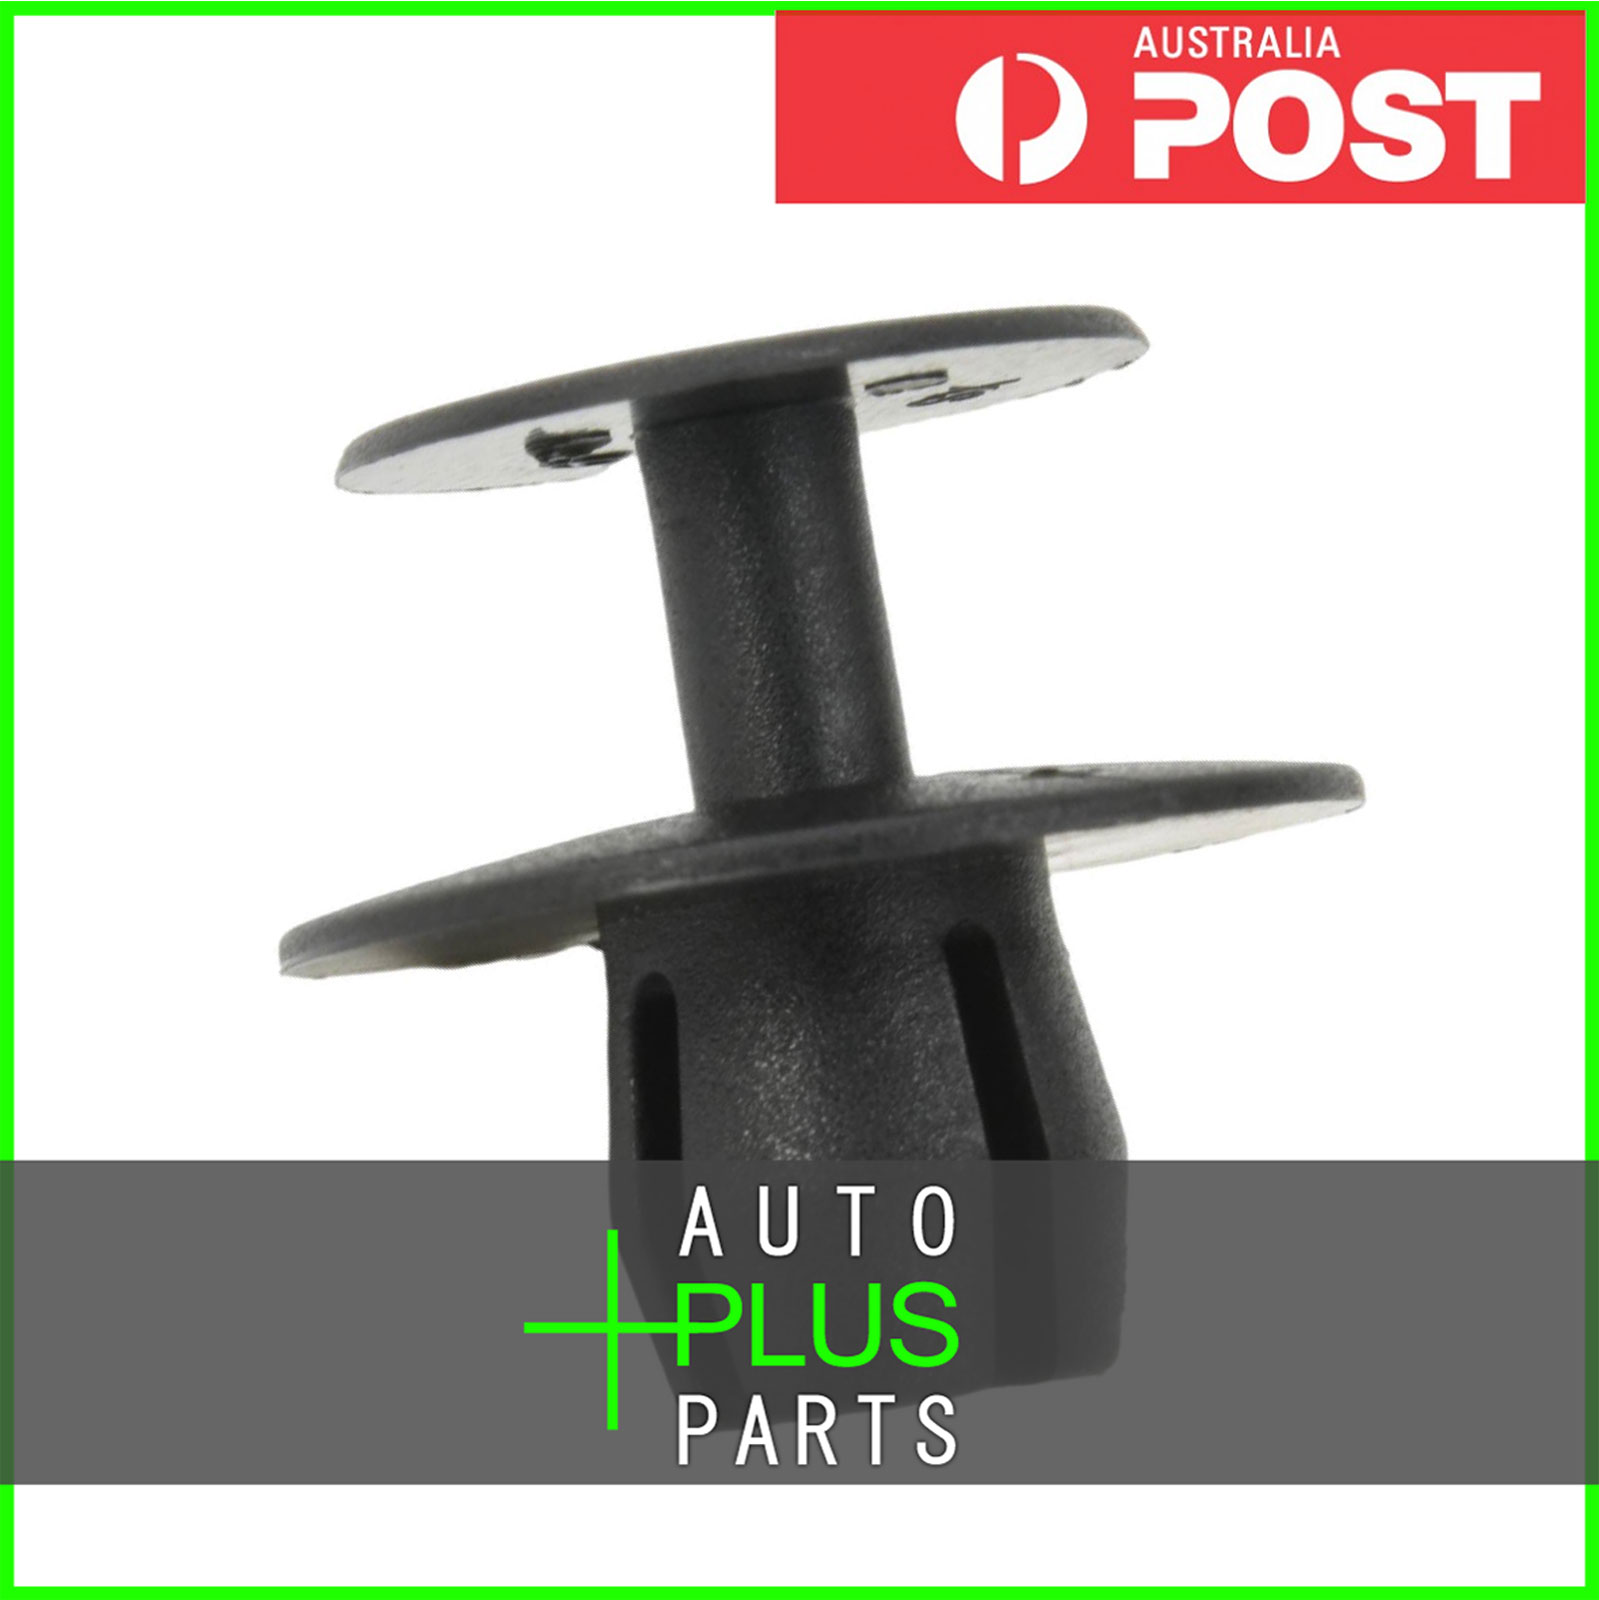 Fits MERCEDES BENZ 300 SD TURBODIESEL USA; S 350 TURBODIESEL USA RETAINER CLIP Product Photo